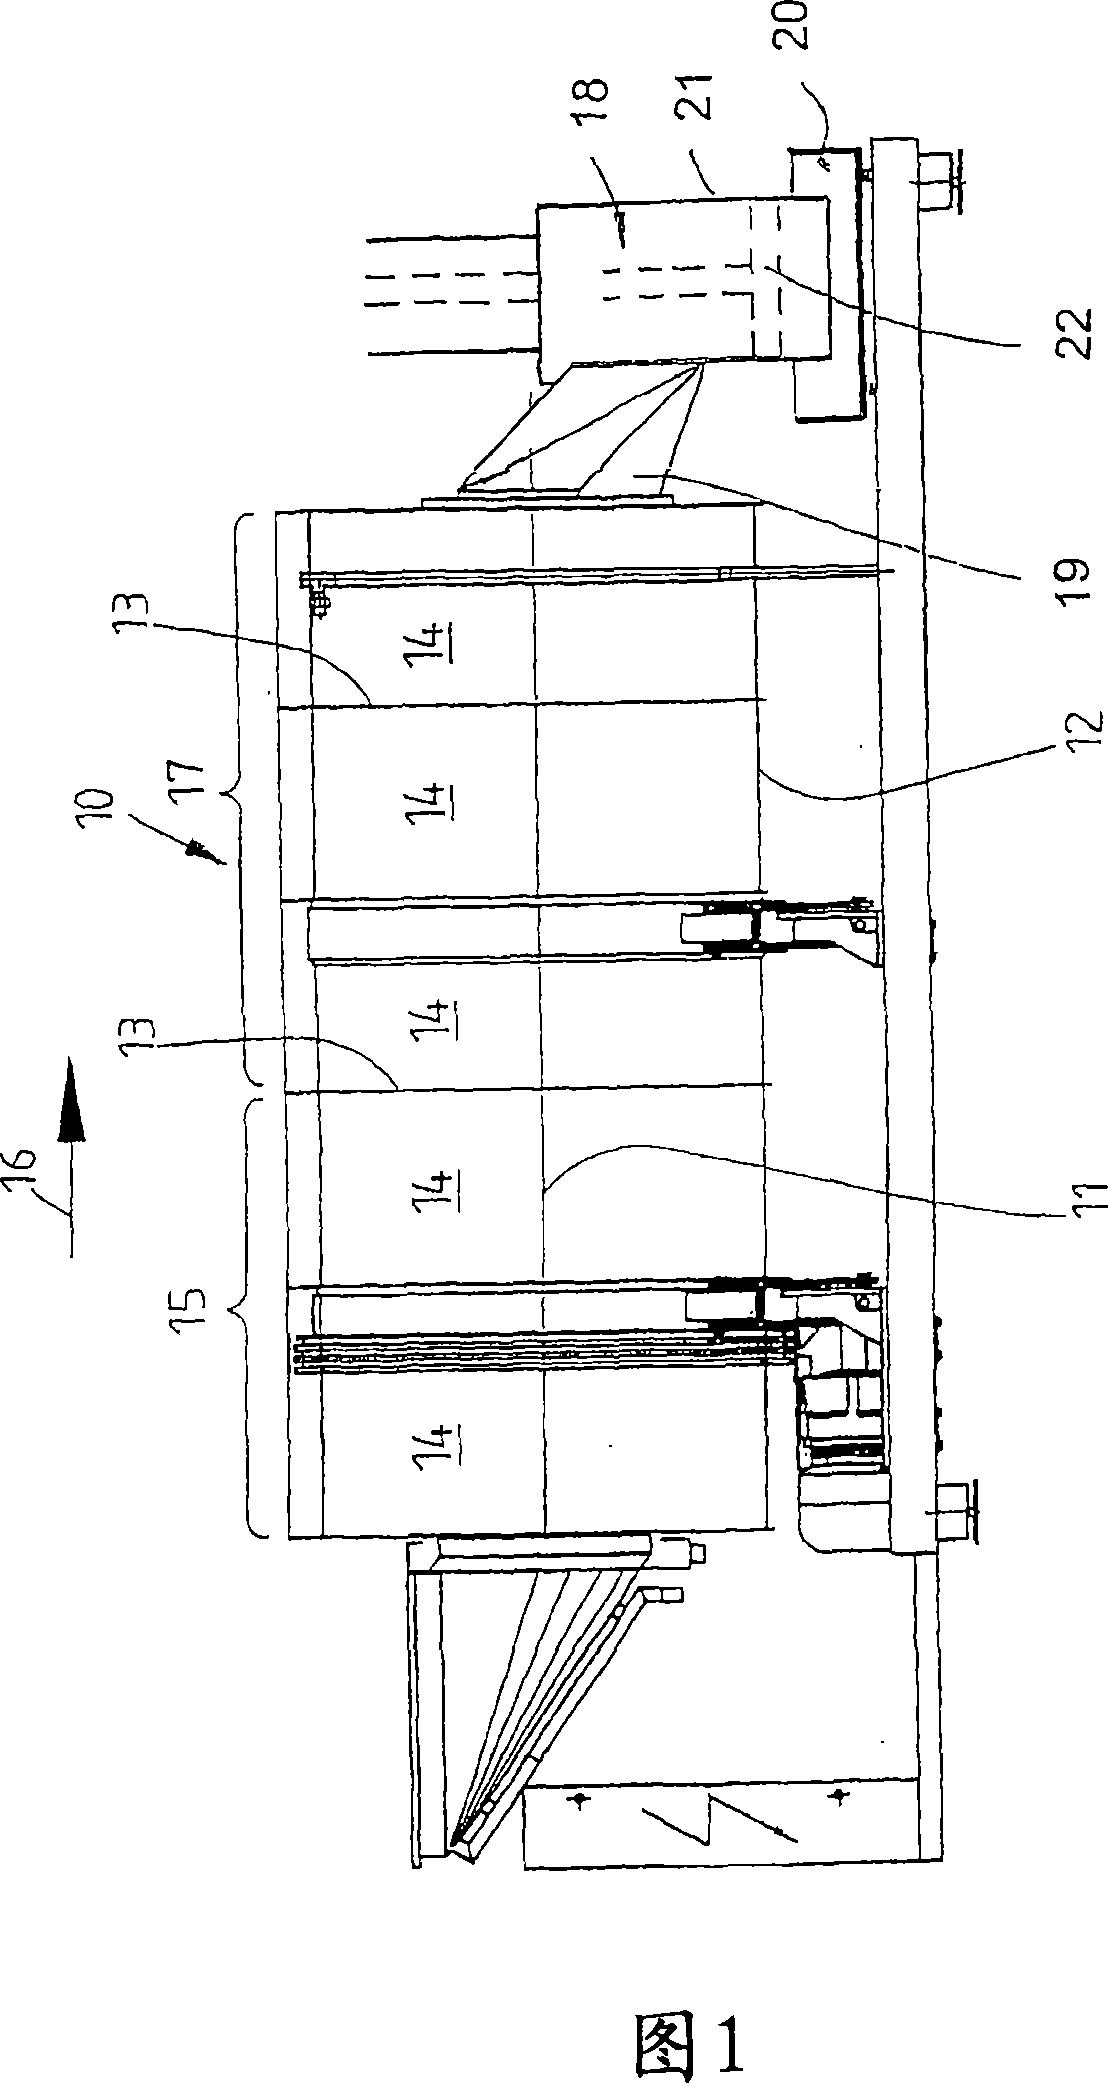 Method and device for the wet treatment of items to be washed